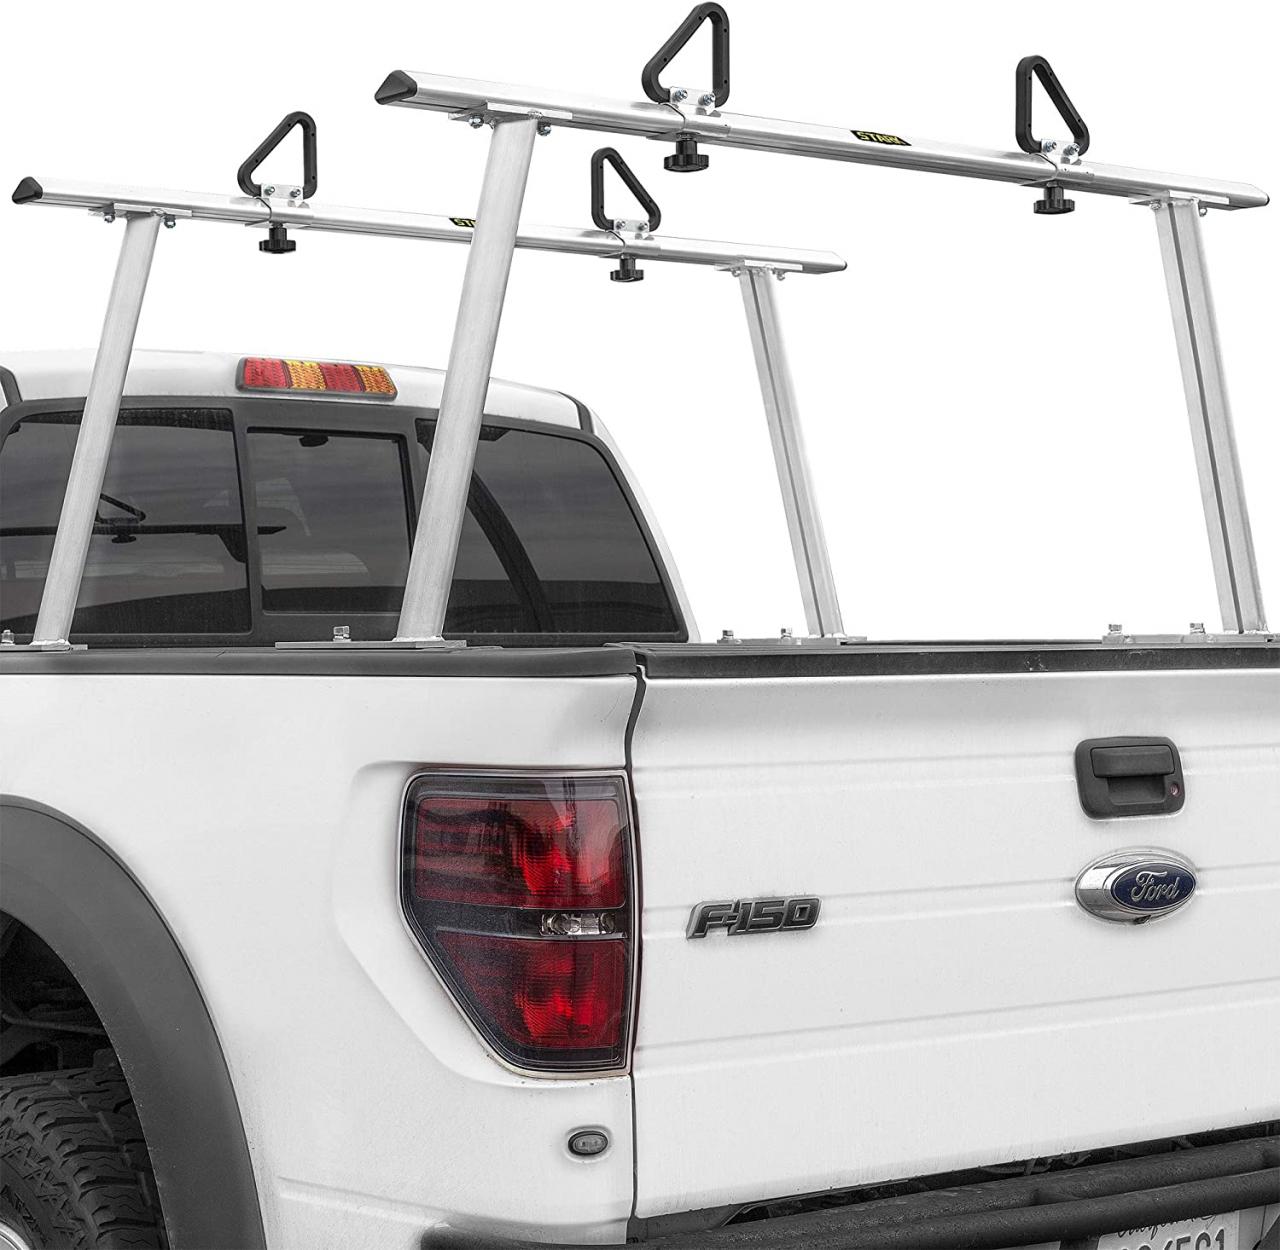 Buy Stark Universal Truck Rack Extendable Aluminum Pick Up Truck Ladder Rack  Contractor Pipe Rack (No-Drilling Required) 1,000lbs Capacity Online in  Turkey. B0842Y9PLY